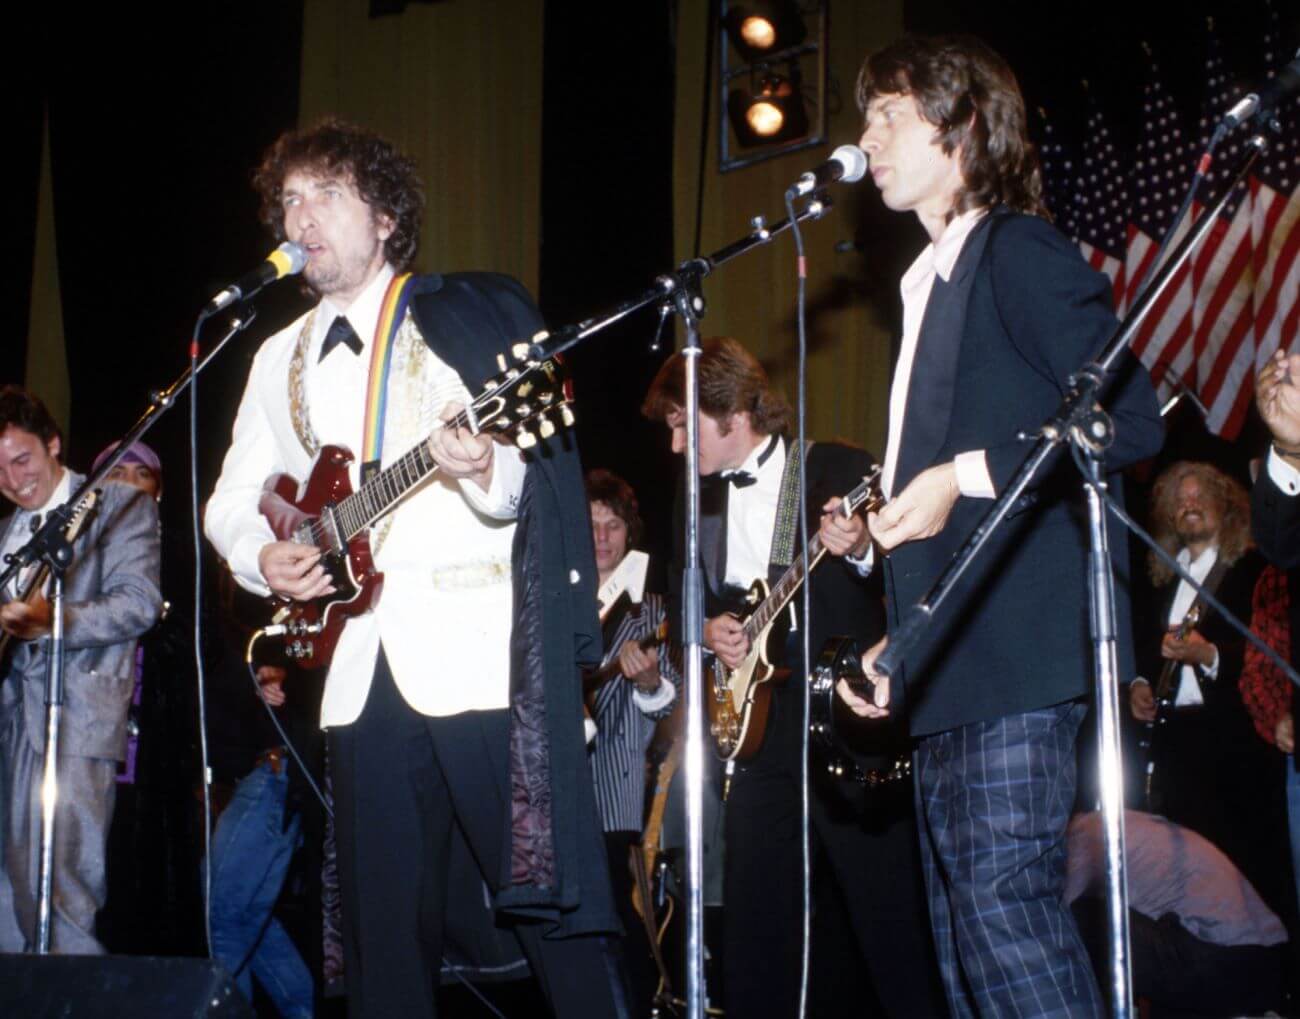 Bob Dylan plays guitar and sings into a microphone. Mick Jagger stands in front of a microphone.